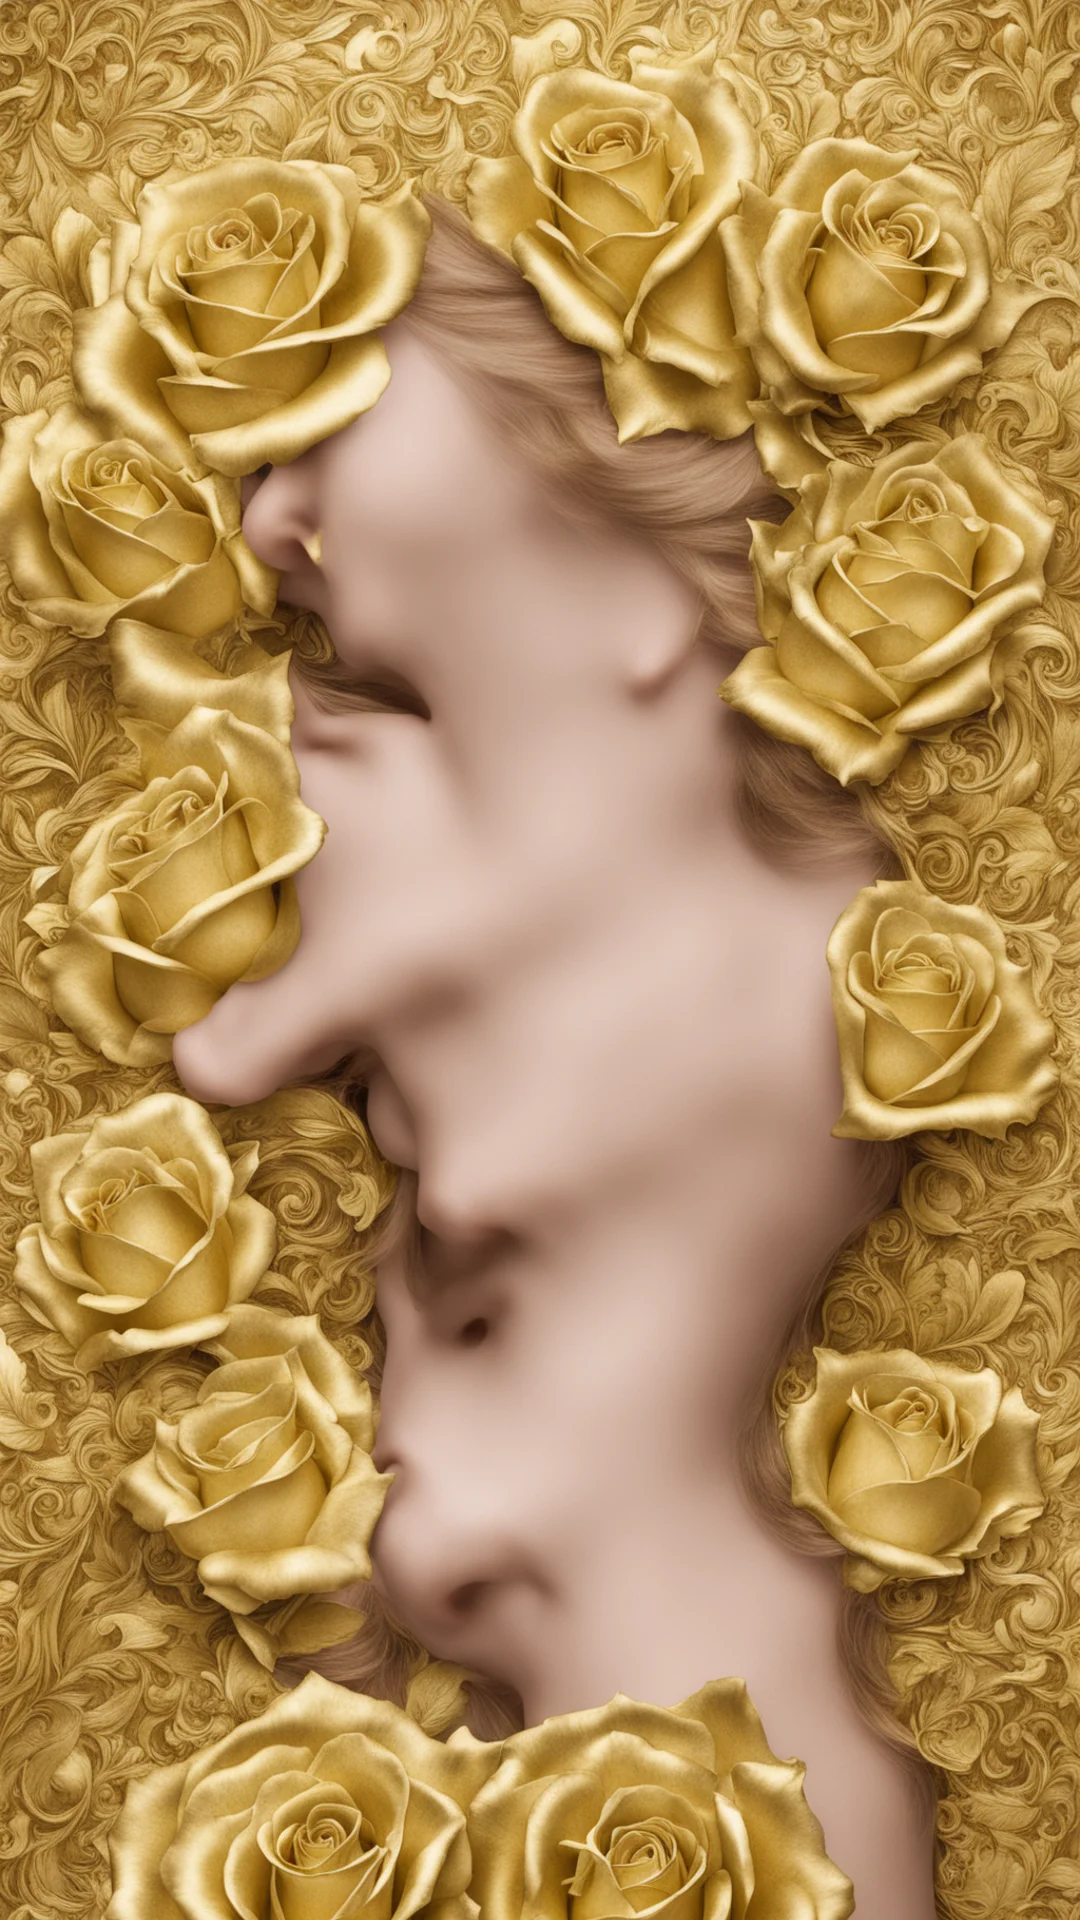 artstation art nouveau gold roses with a woman confident engaging wow 3 tall